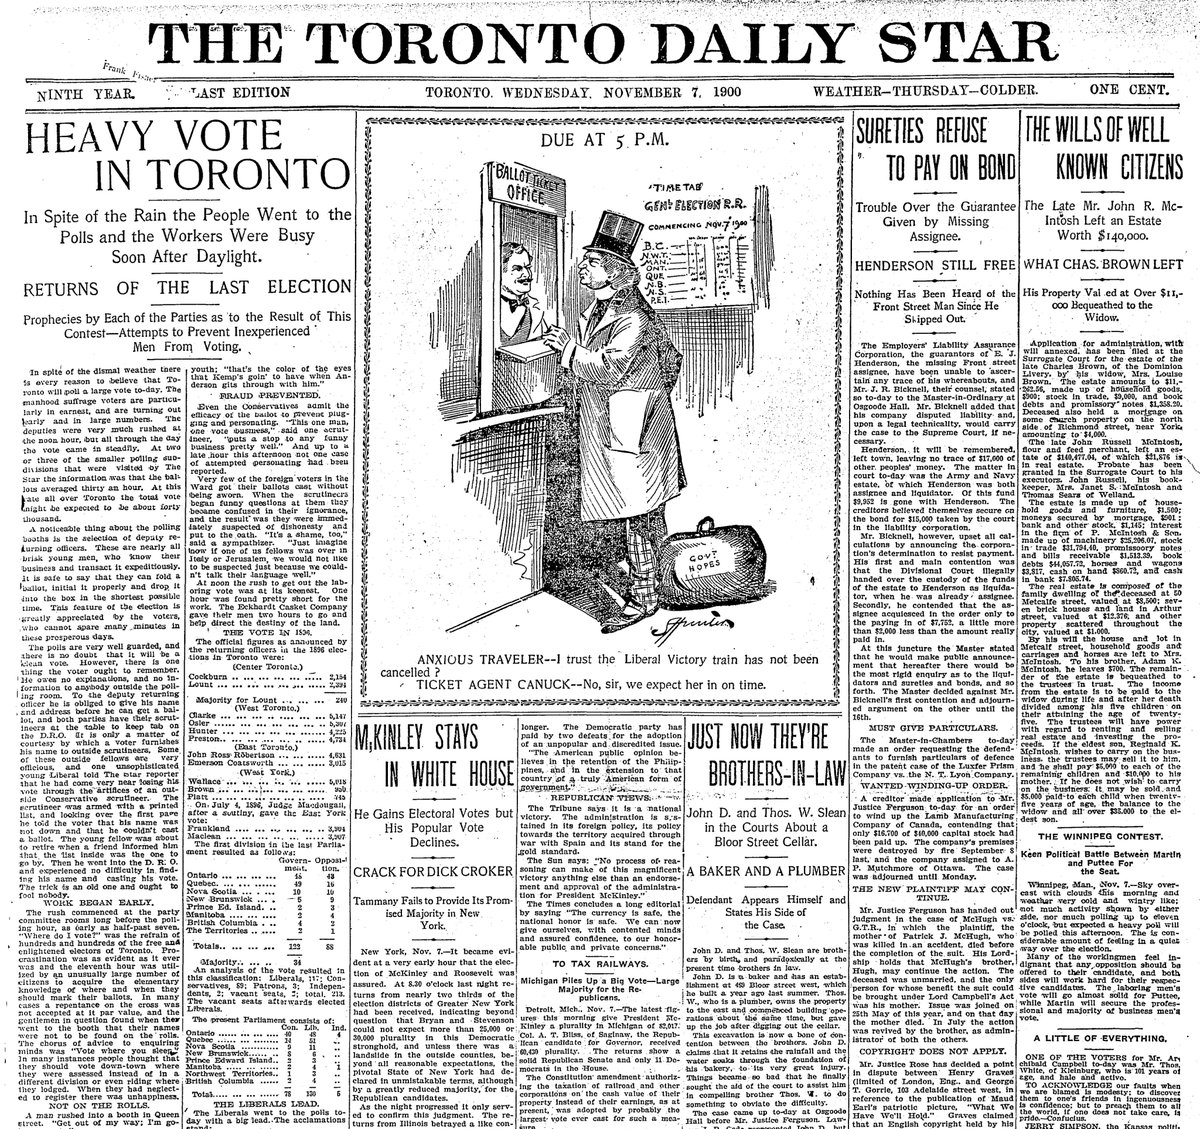 1900: “McKinley Stays in White House,” but bigger news is the Canadian election that took place a day later, giving Laurier’s Liberals another majority. The Evening Star is now the Toronto Daily Star (the name it would have until 1971), under the editorship of Joseph E. Atkinson.